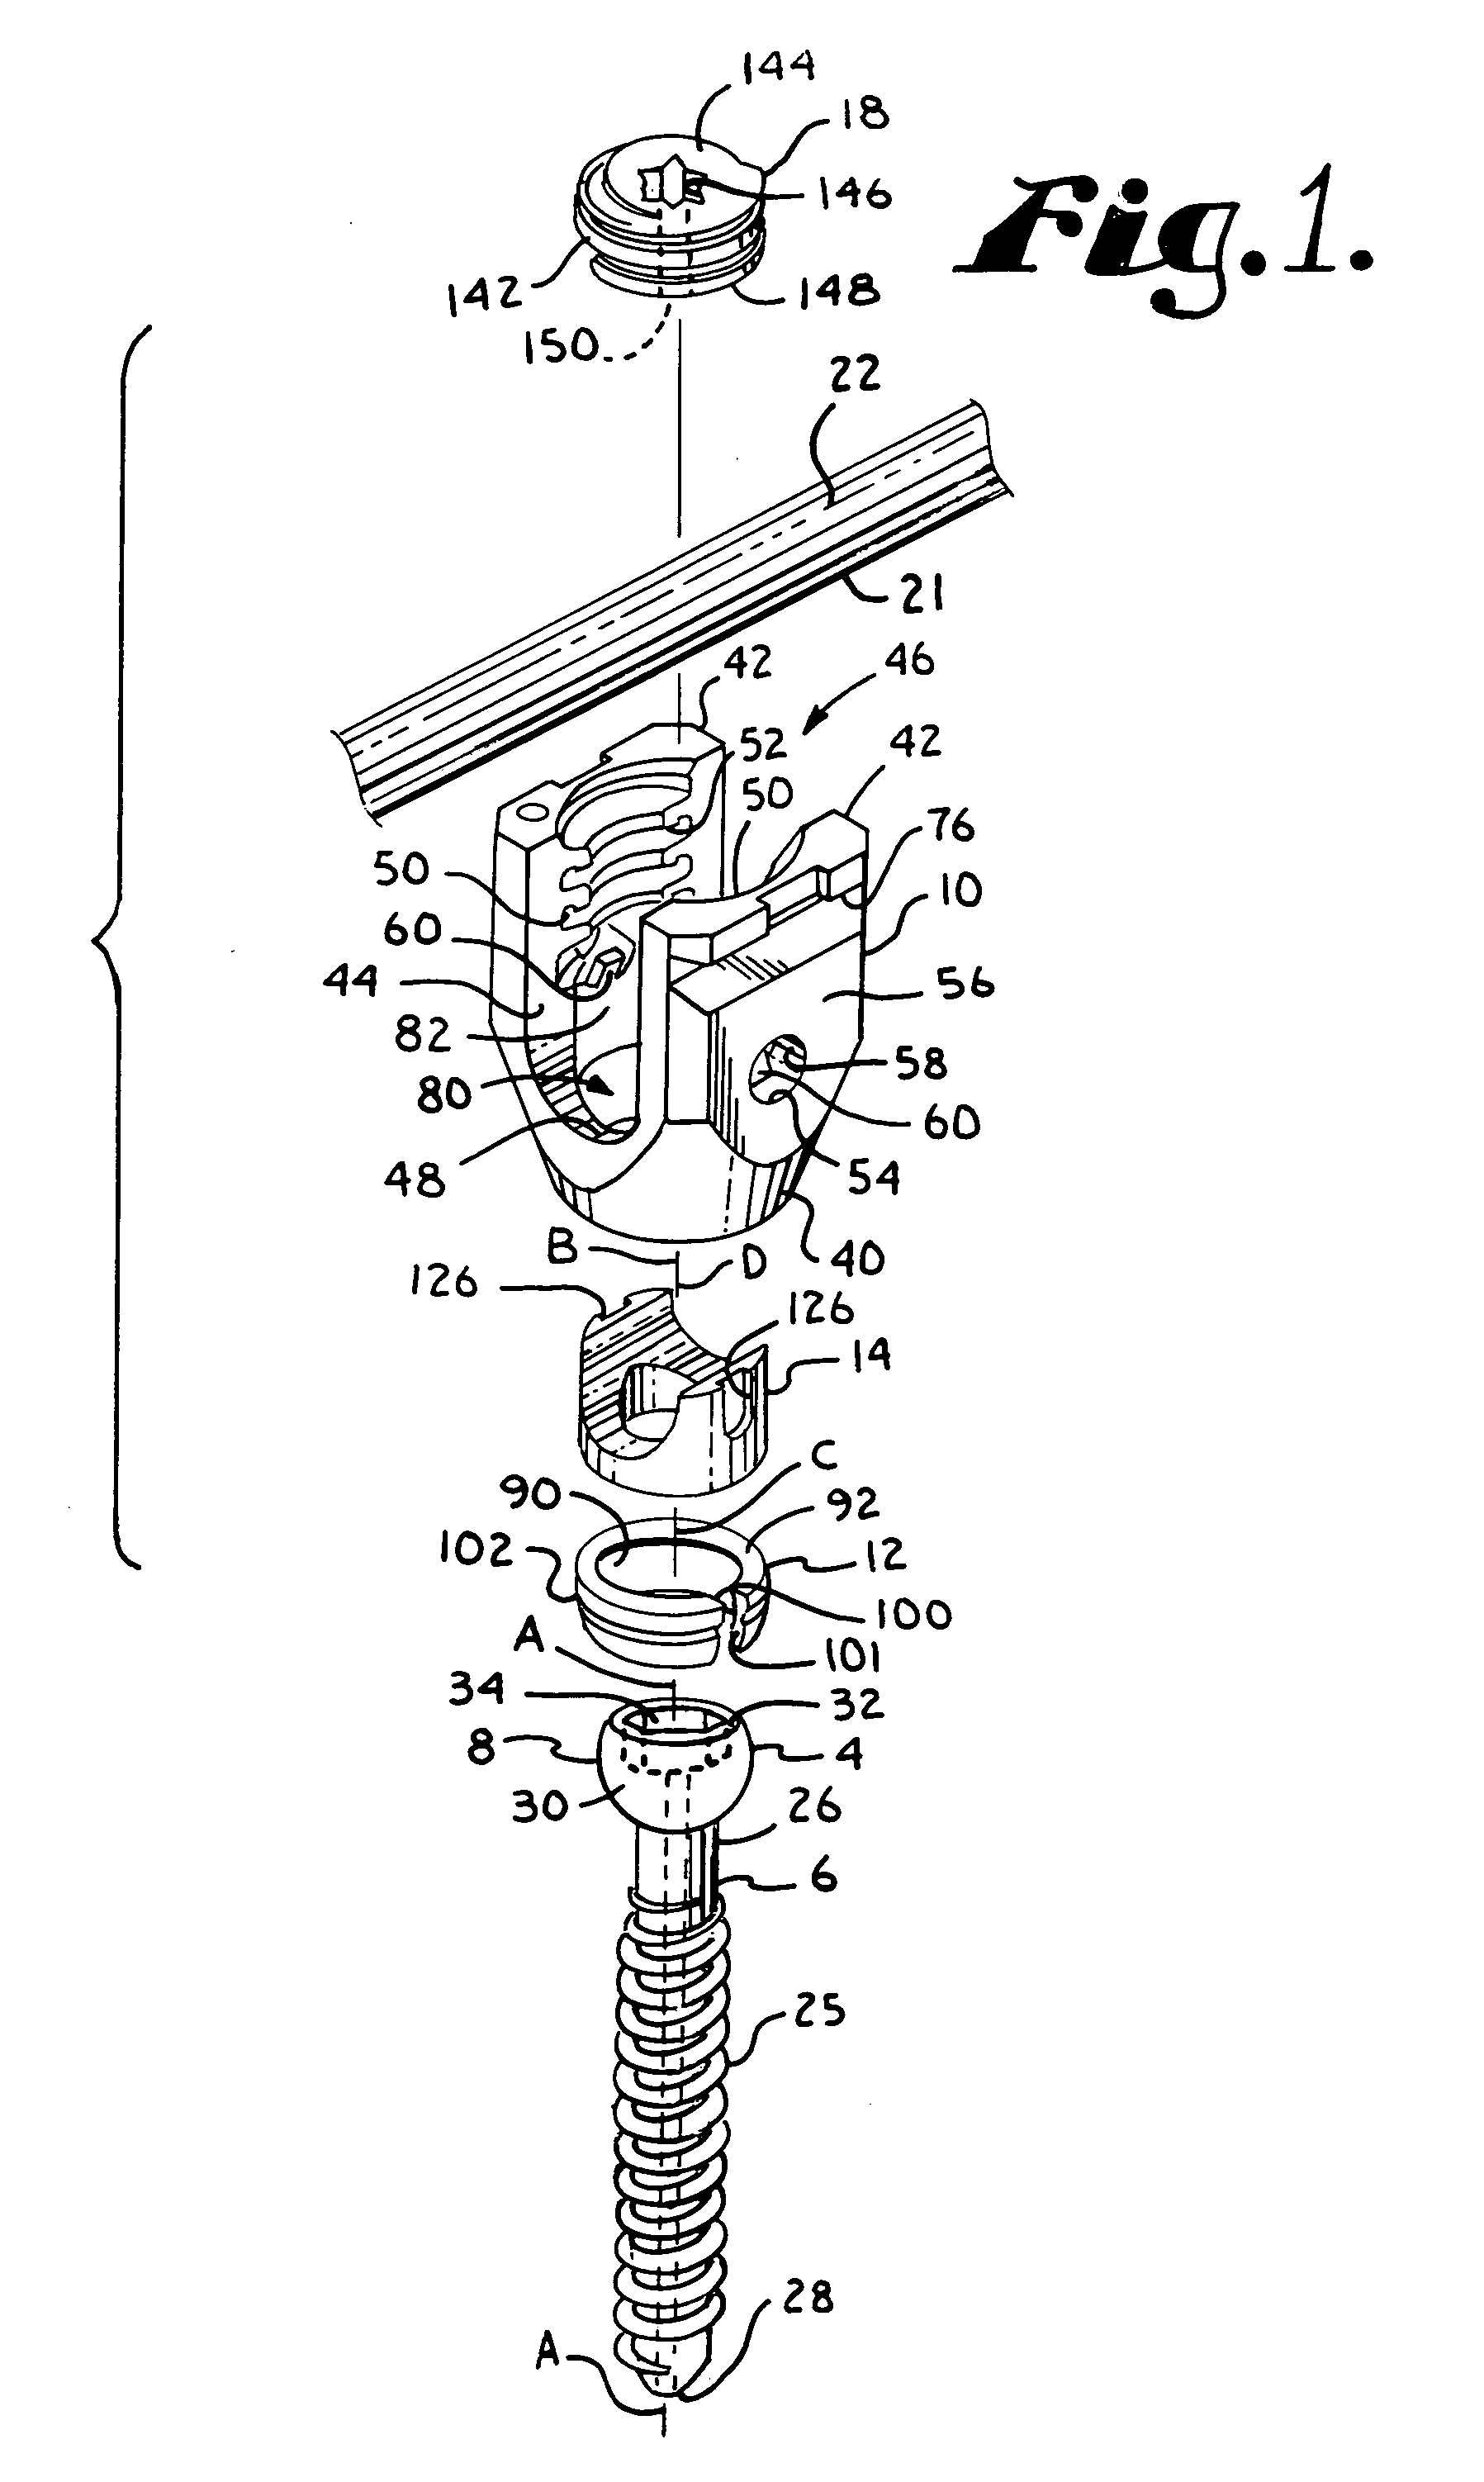 Polyaxial bone screw with spherical capture, compression and alignment and retention structures